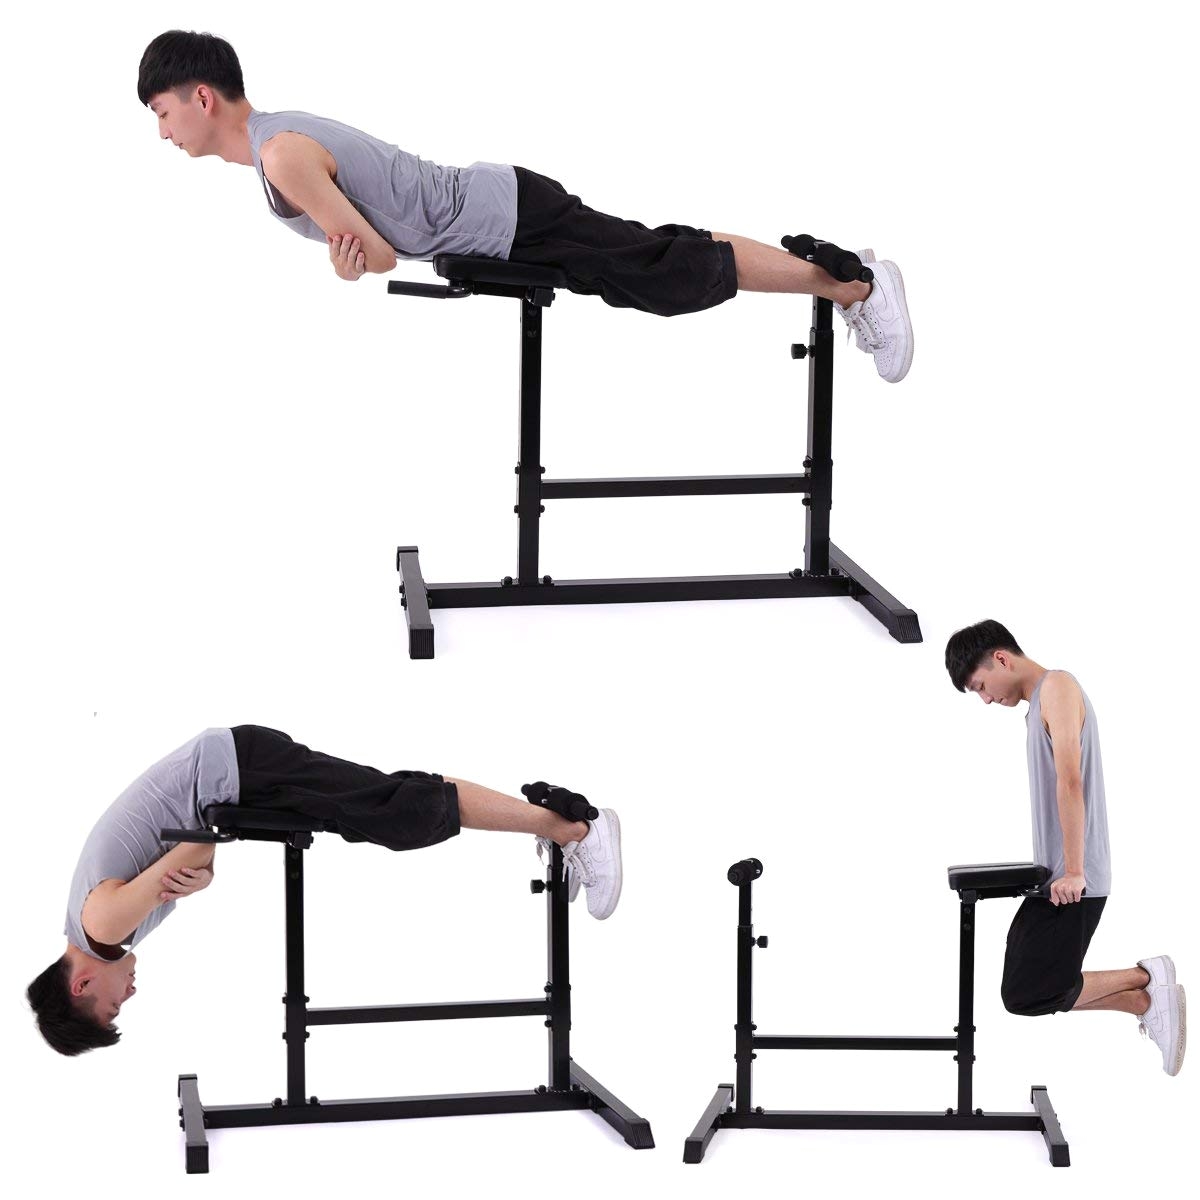 amazon com jaxpety new hyperextension bench roman chair sit up exercise ab home back workout gym sports outdoors